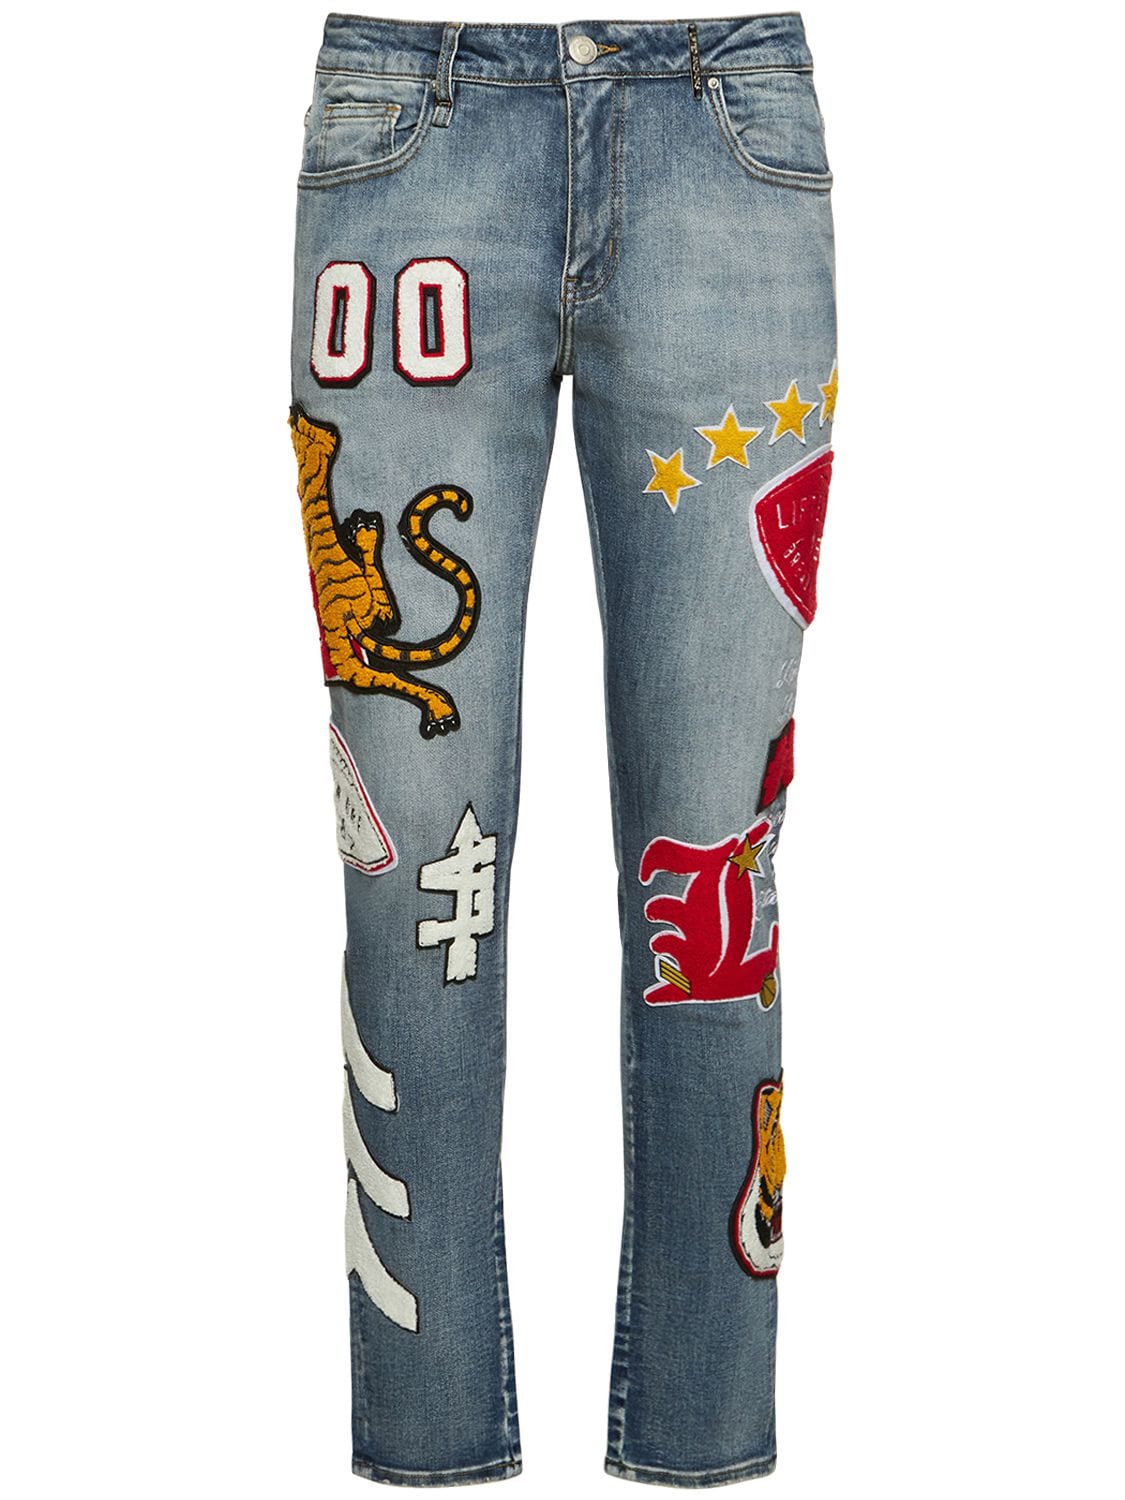 Lifted Anchors Scholar Jeans W/ Patches In Blue,multi